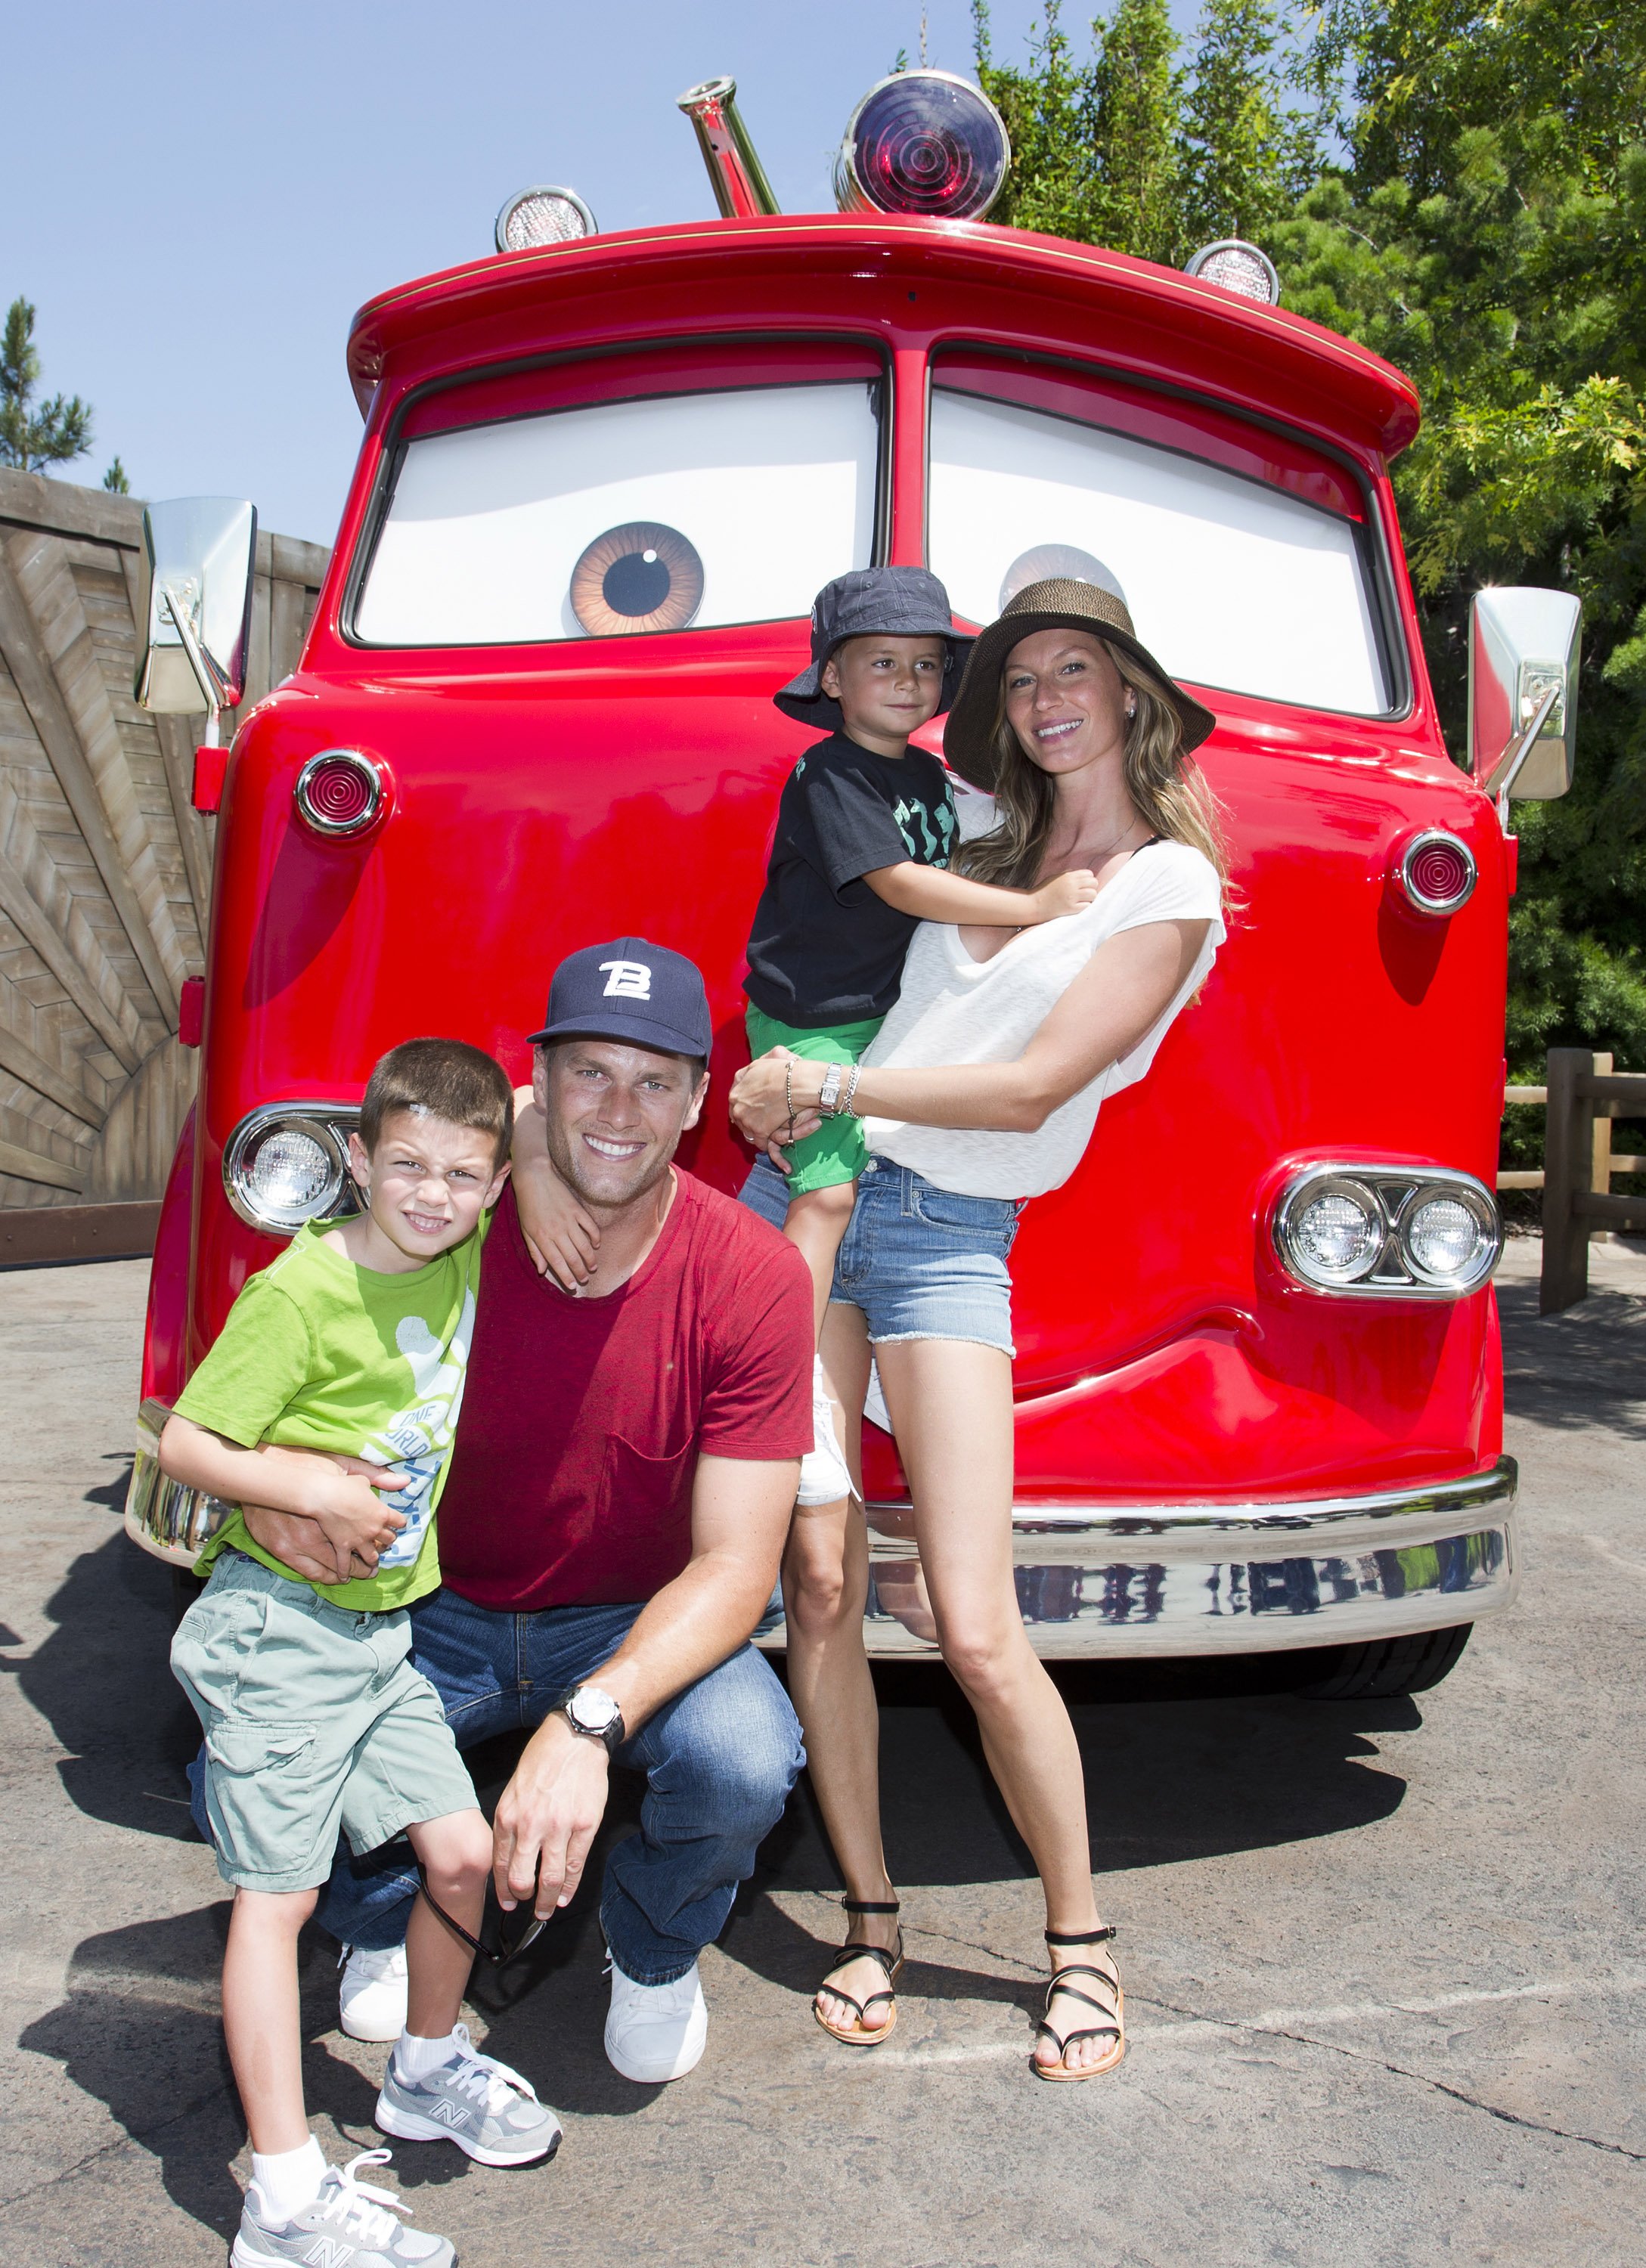 Tom Brady, his son Jack, 5, Gisele Bundchen, and their son Benjamin, 3, pose with Red the Fire Truck at Cars Land at Disney California Adventure park on July 2, 2013, in Anaheim, California. | Source: Getty Images